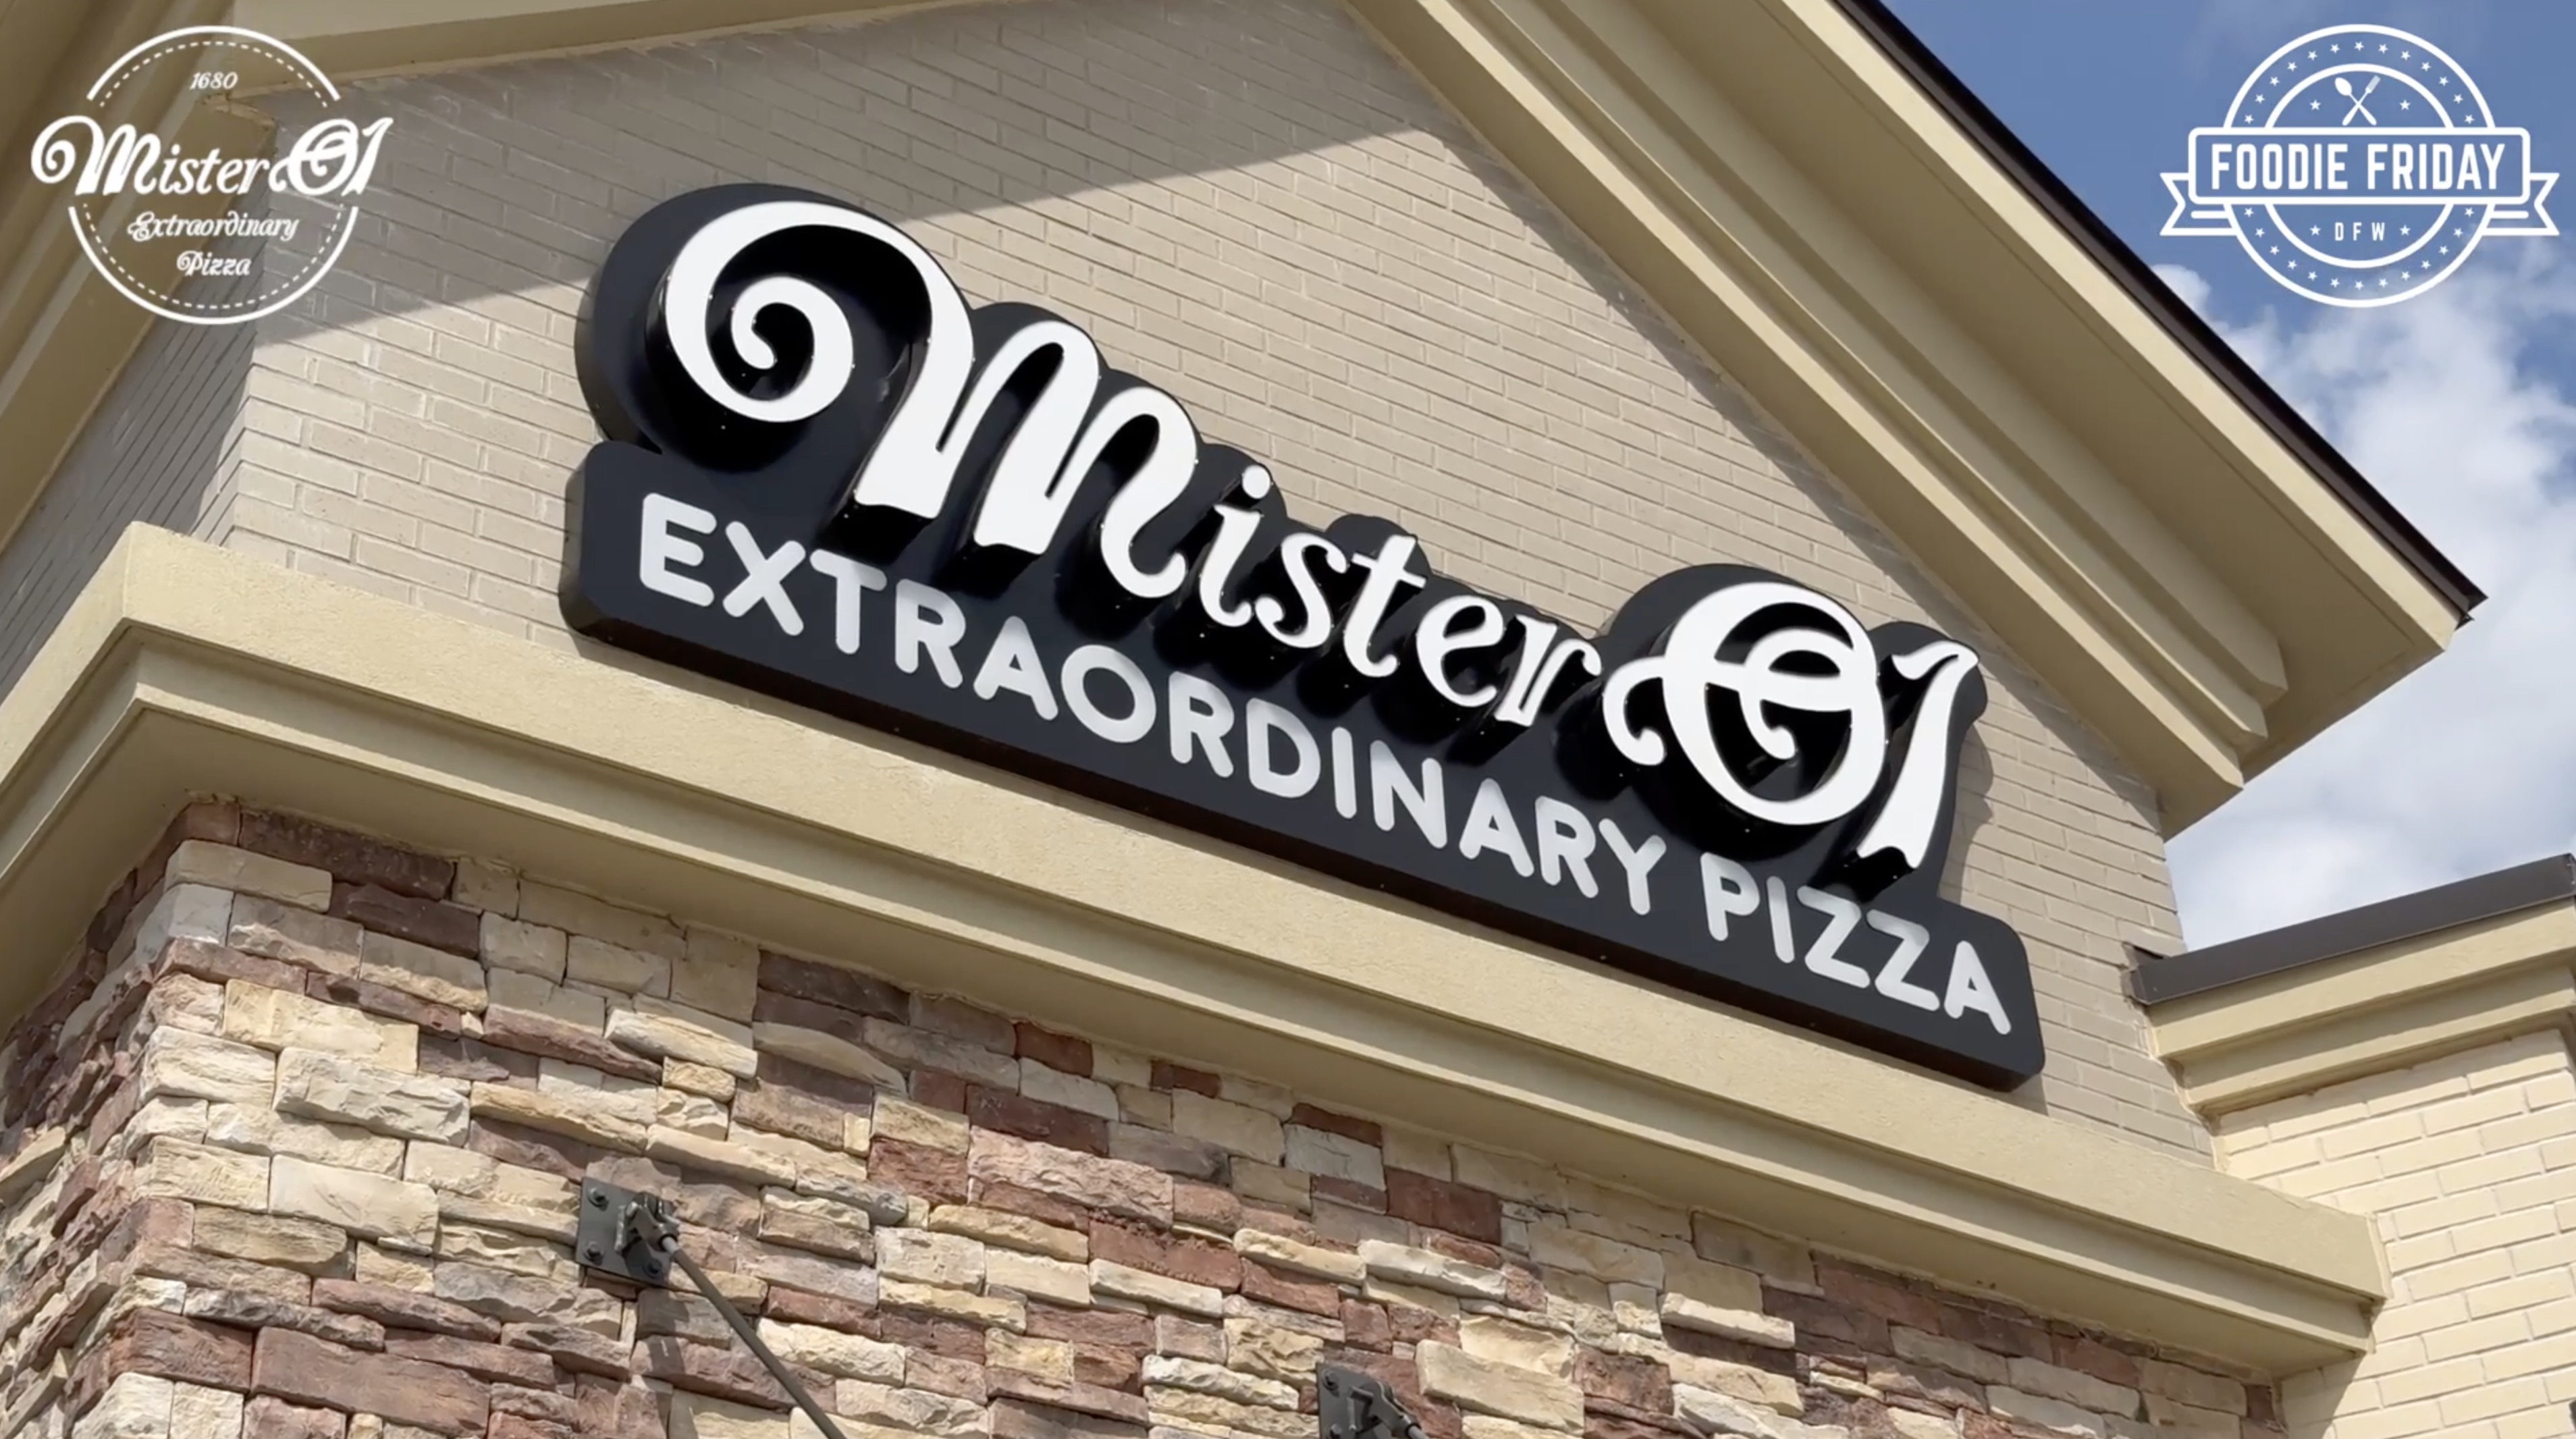 Foodie Friday DFW || Mister 01 Extraordinary Pizza